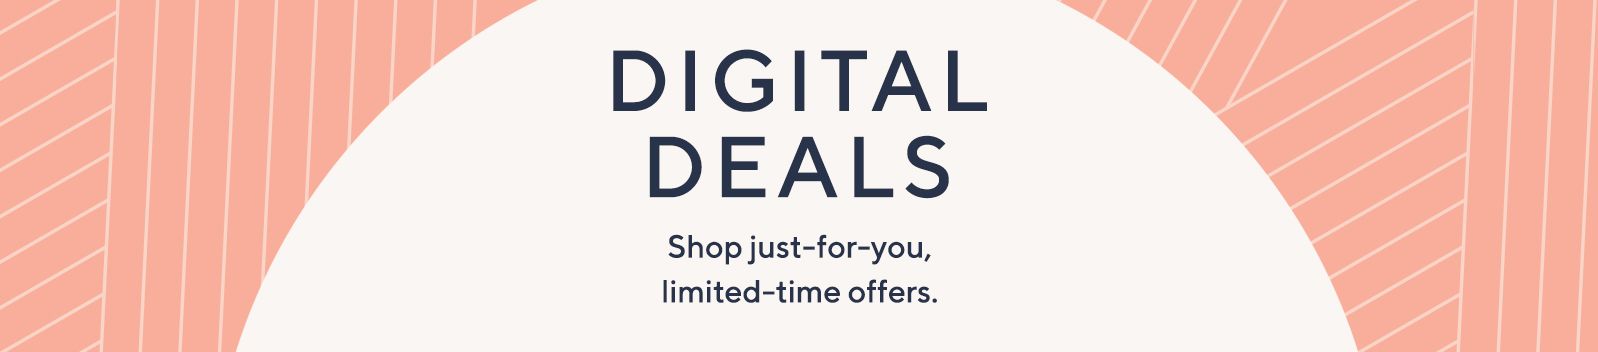 Digital Deals. Shop just-for-you, limited-time offers.